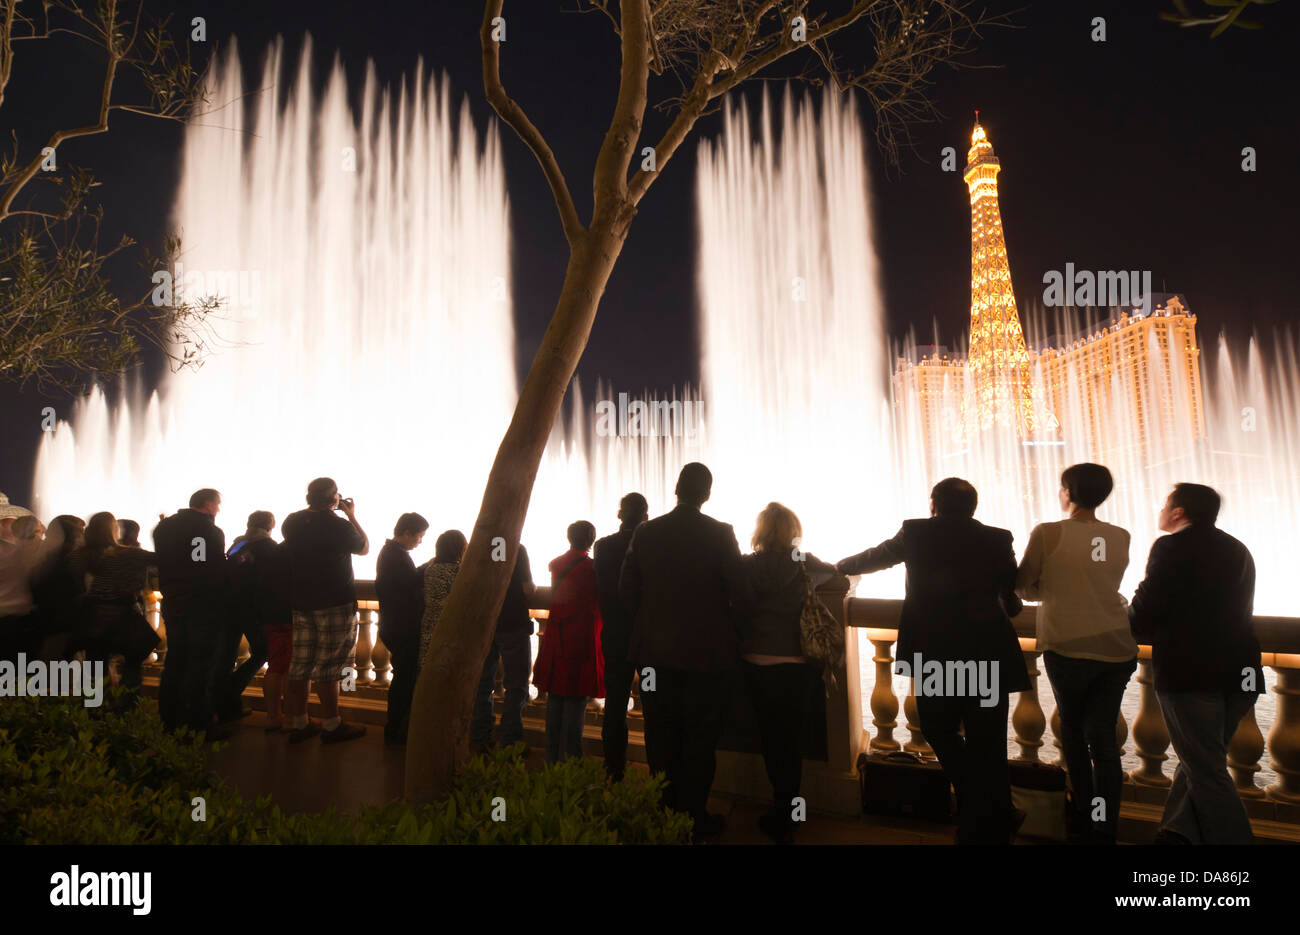 Visitors look at the fountain display of the Bellagio on the Strip in Las Vegas, NV, USA, March 9, 2011. (Adrien Veczan) Stock Photo